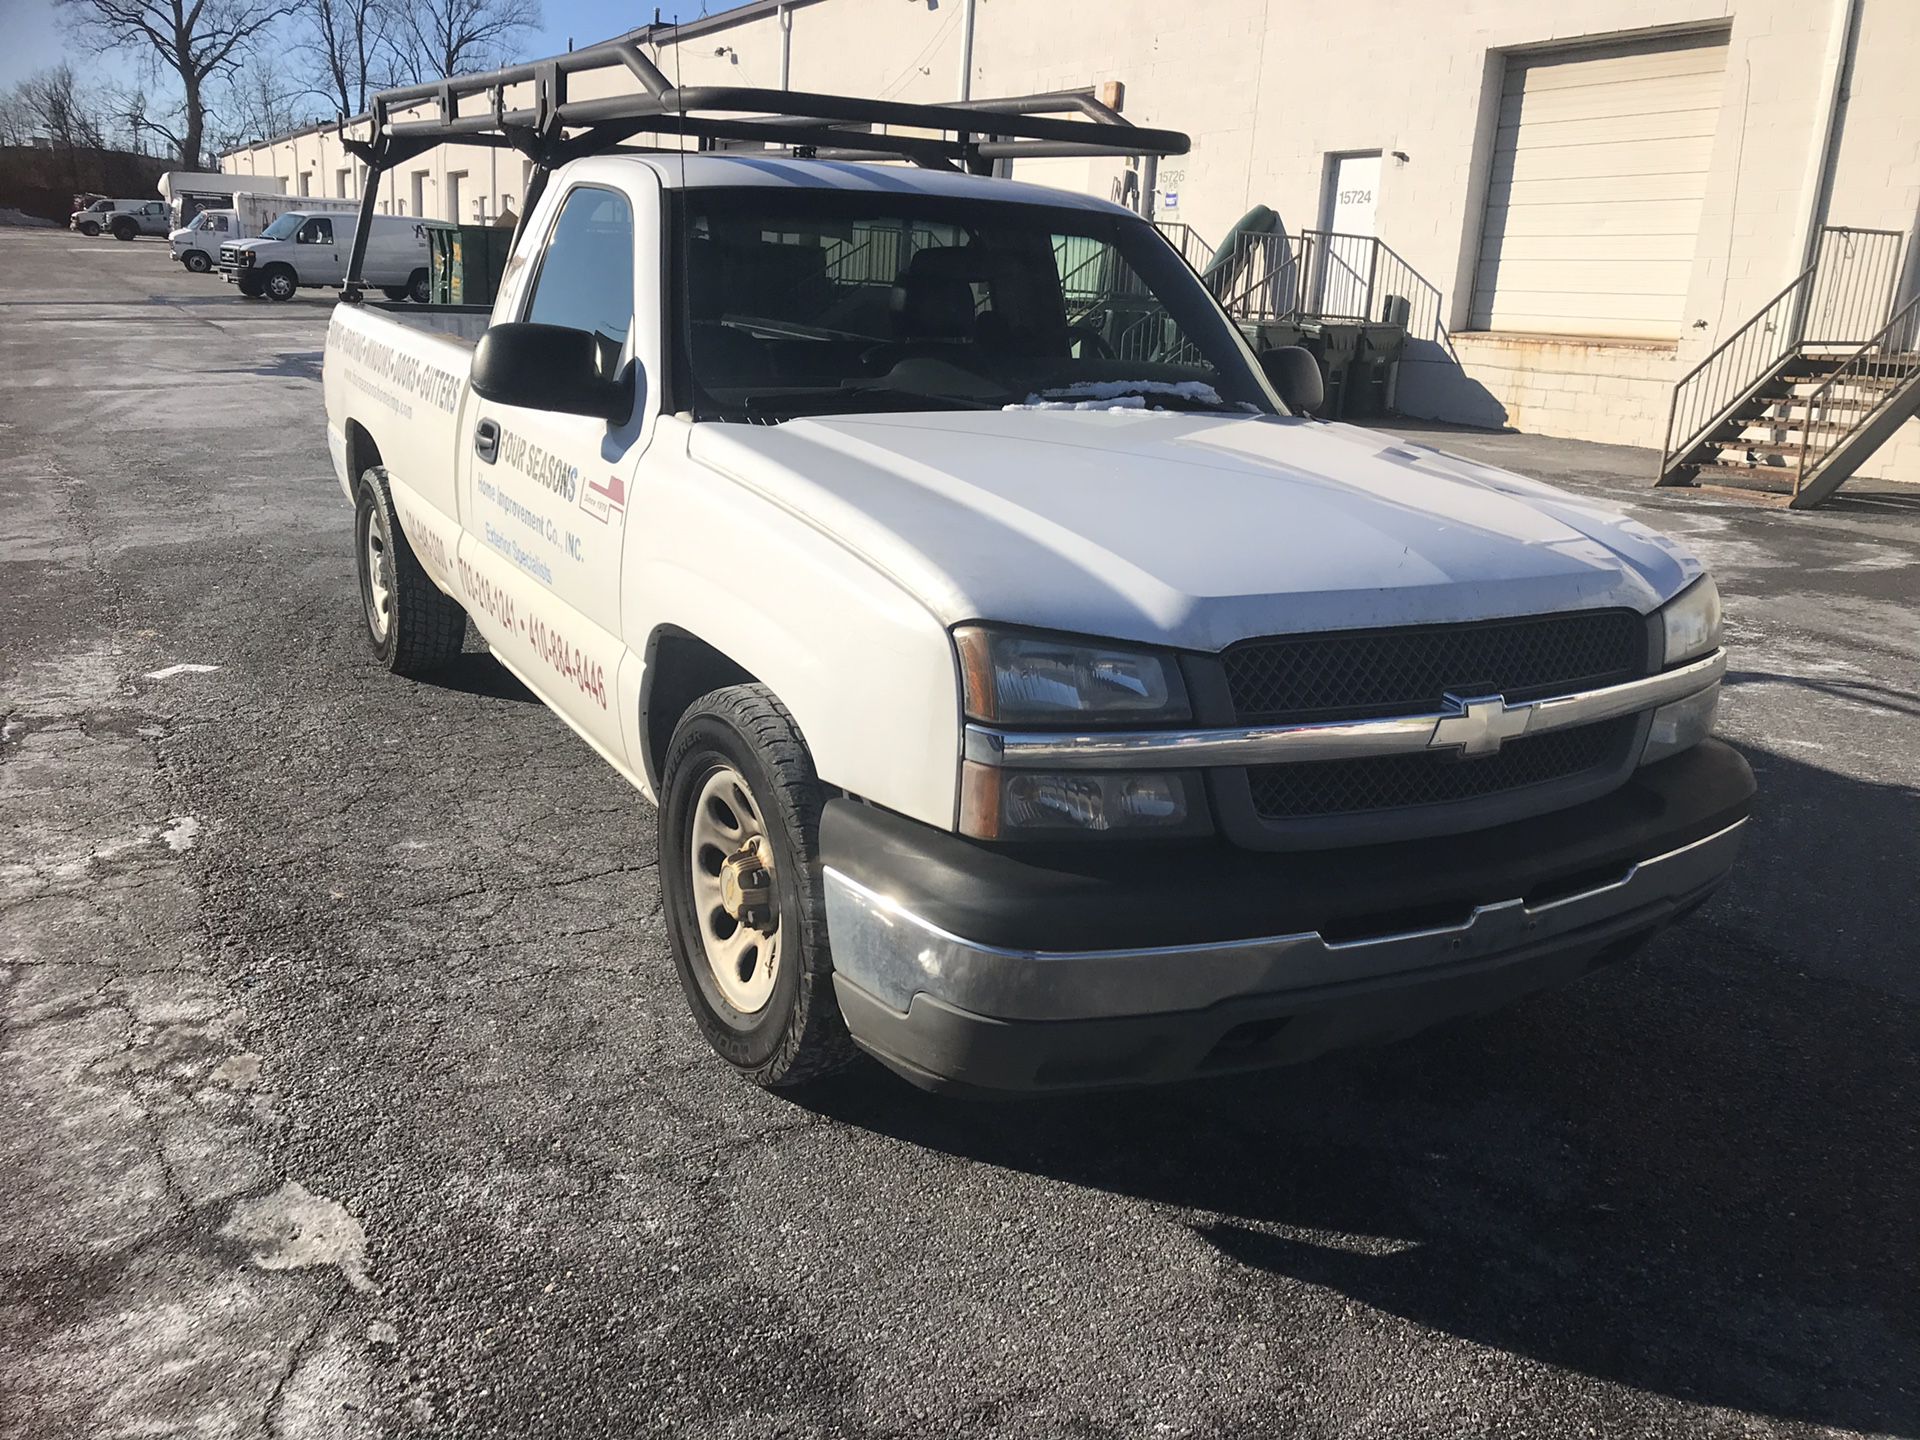 2005 CHEVY SILVERADO K1500 WORK TRUCK 8FOOT BED AUTOMATIC PICKUP TRUCK V6